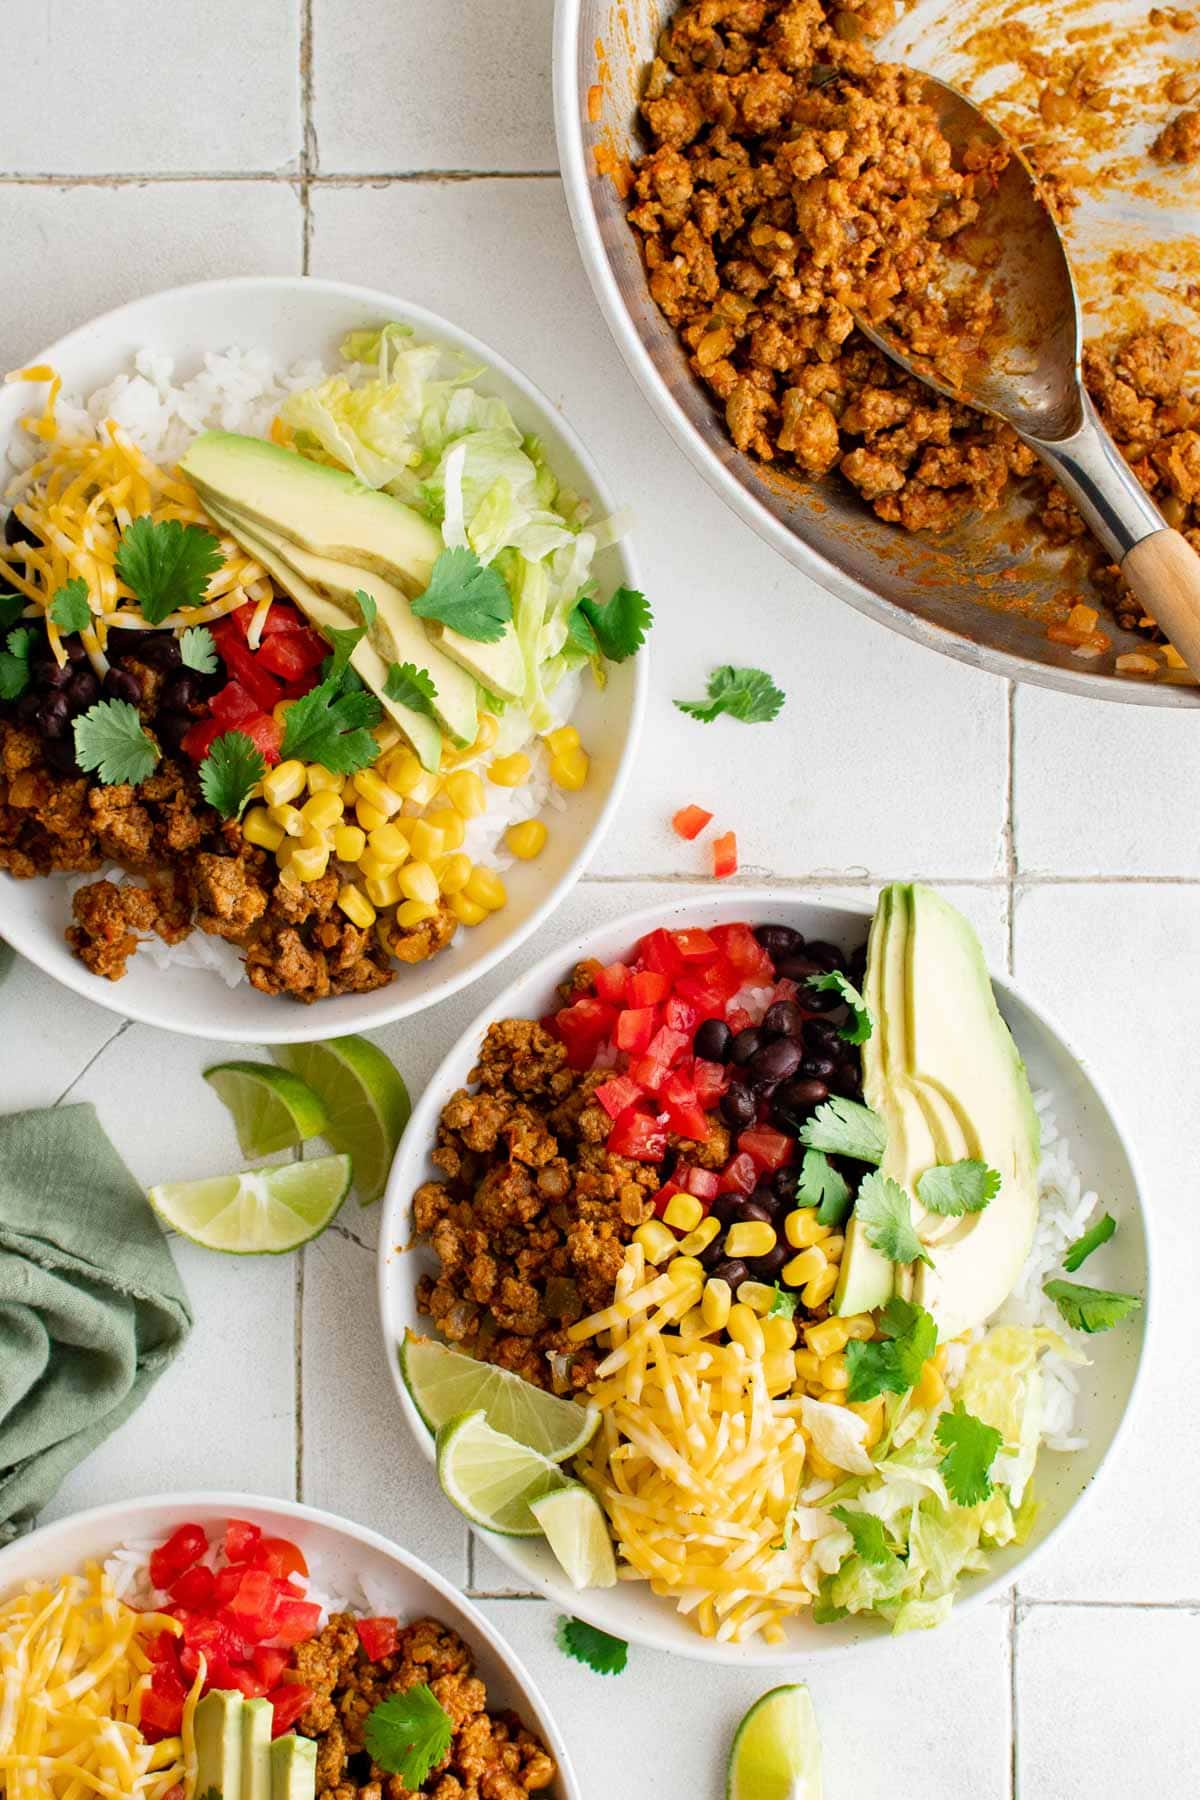 Turkey burrito bowls, and a skillet of taco meat.